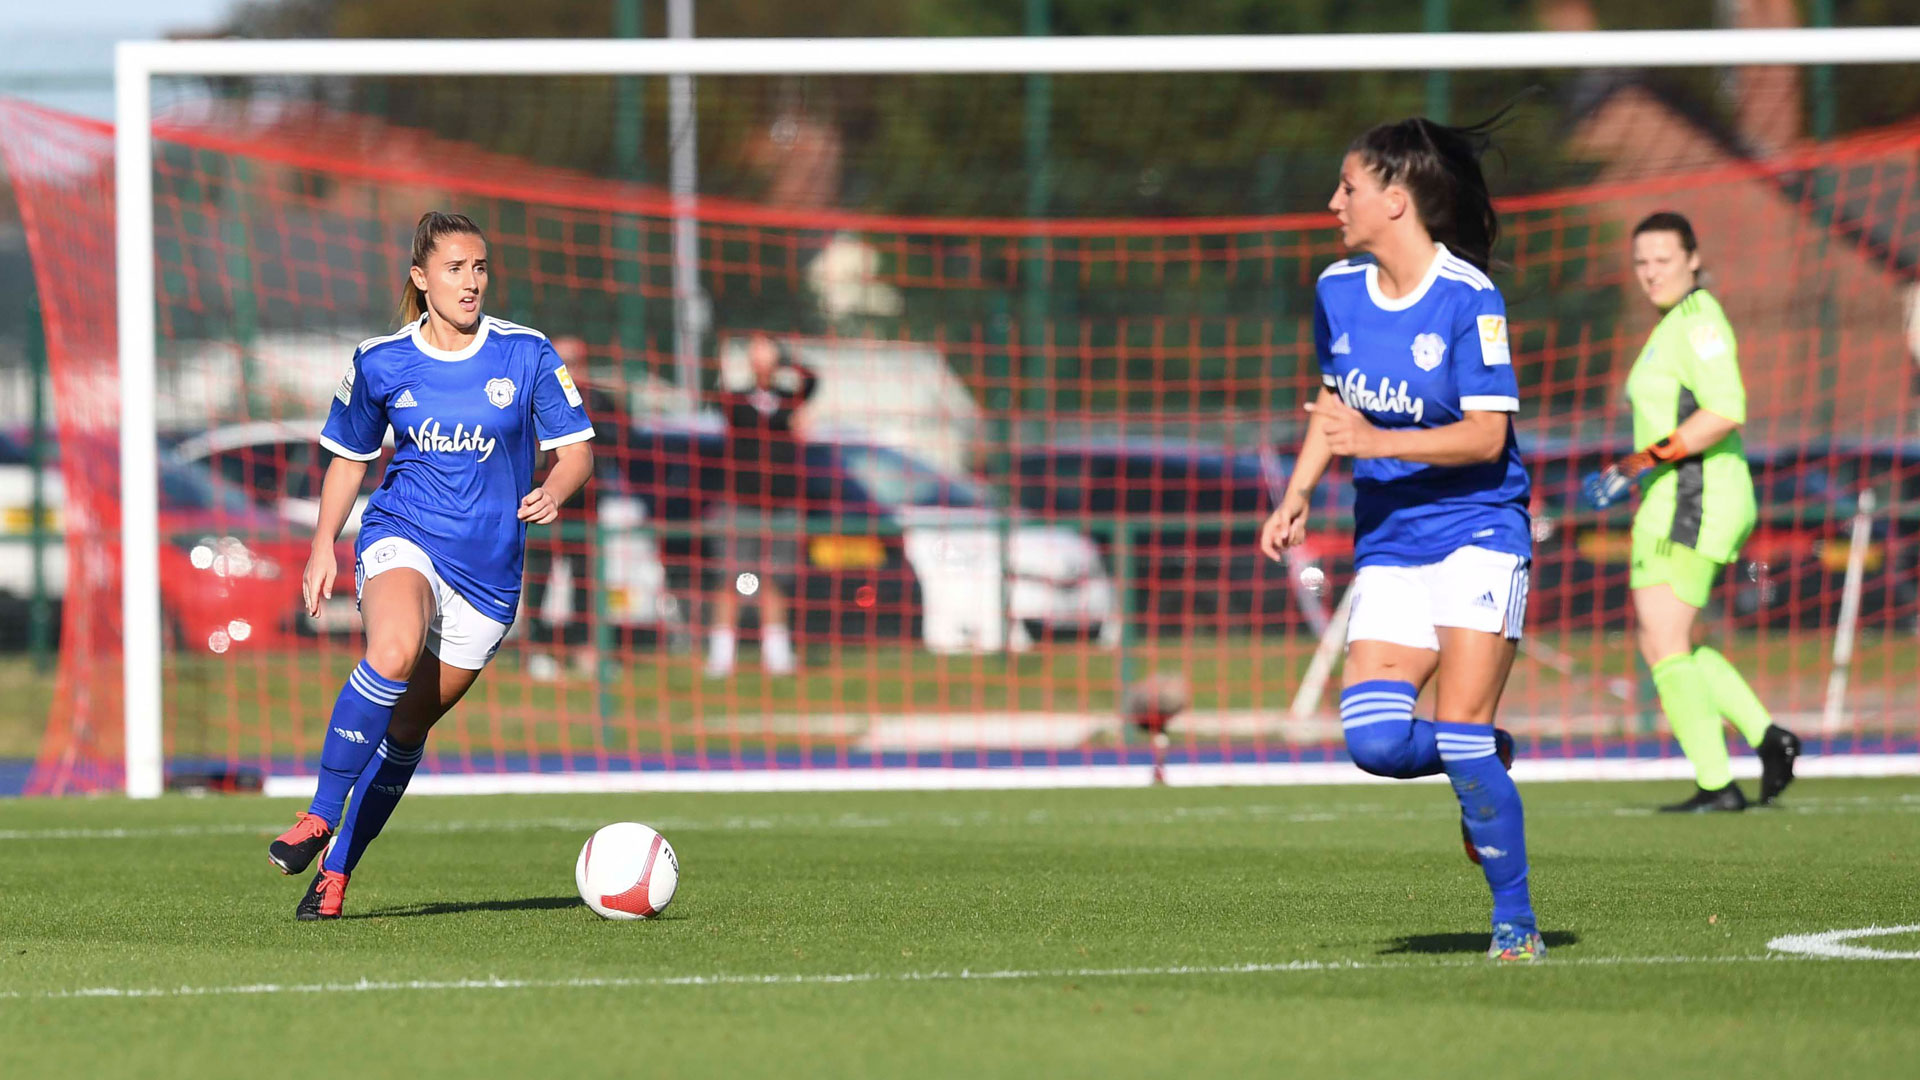 The Bluebirds in action at Leckwith...